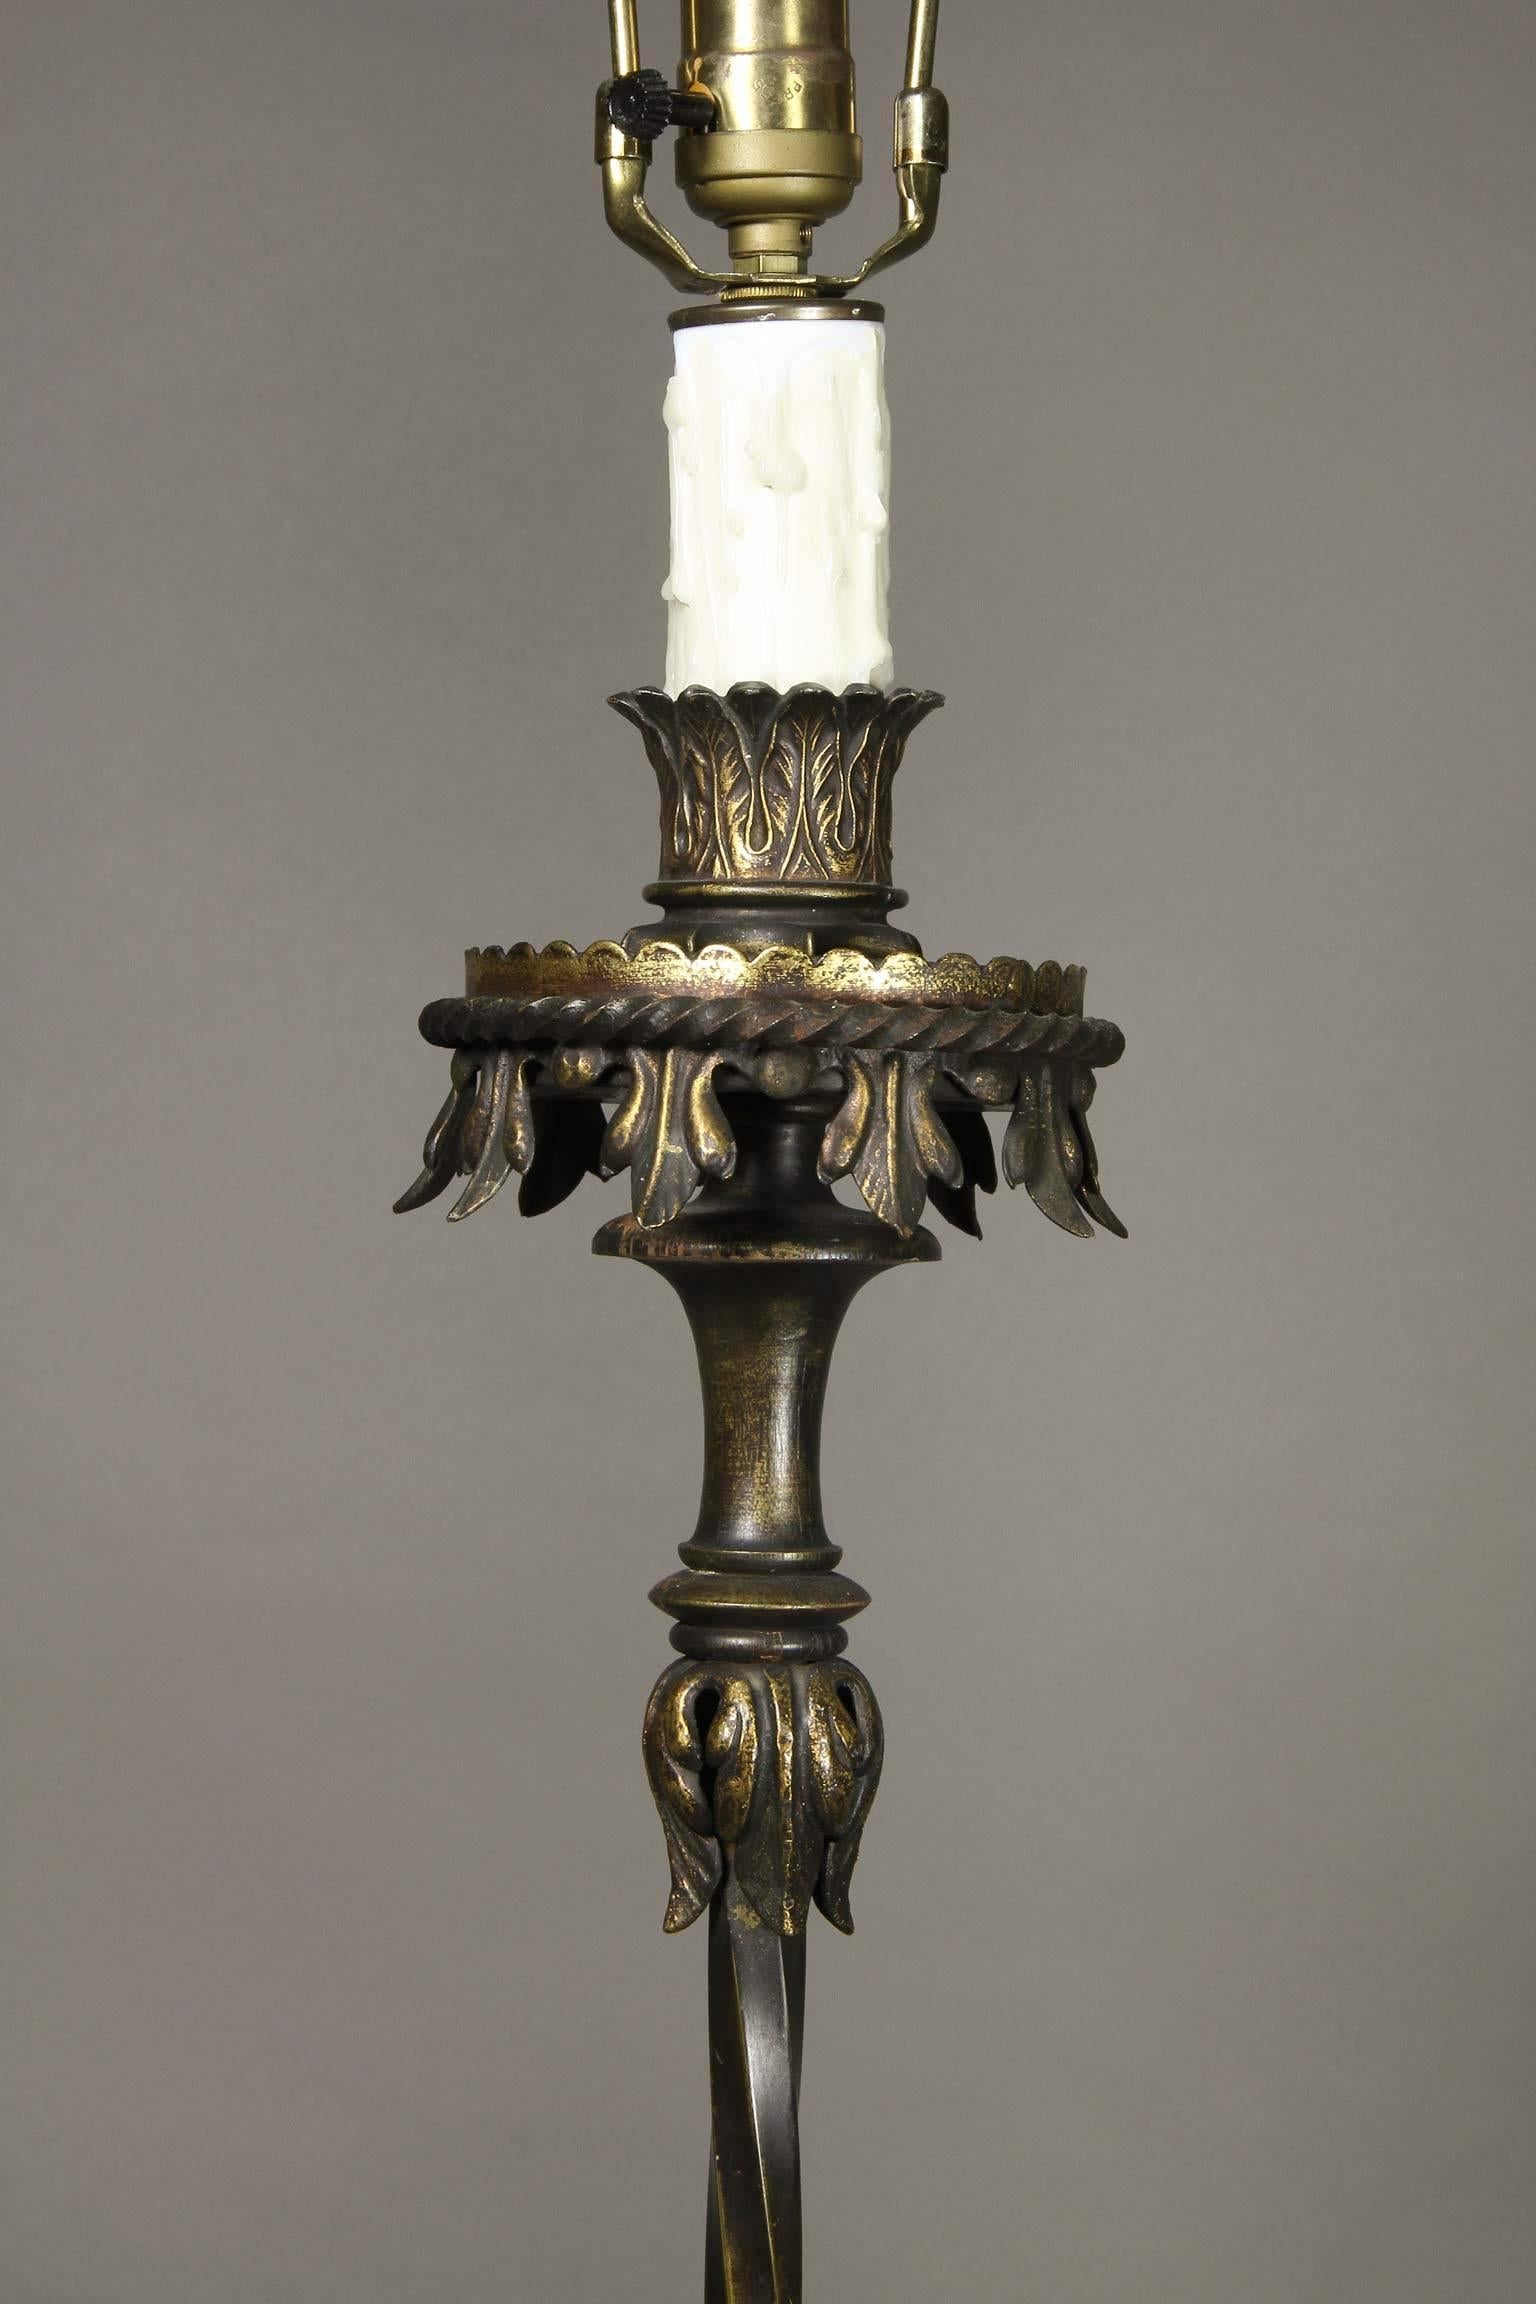 Each with one light socket , twist column terminating in weighted base in the form of four spaniels. Shades